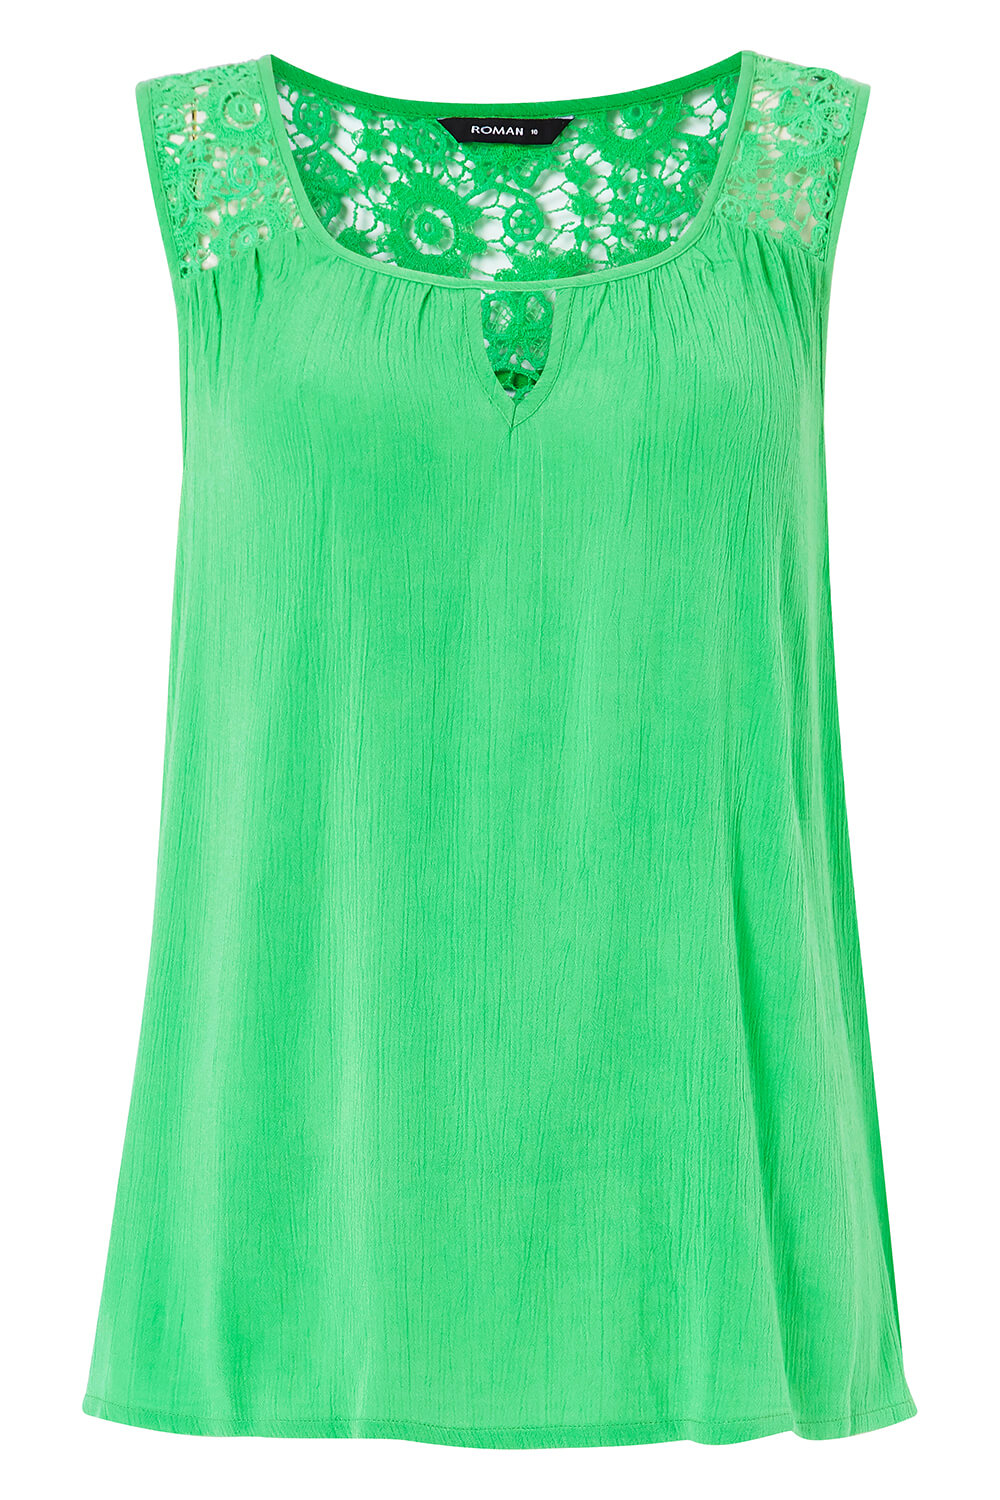 Lace Back Keyhole Detail Top in Green - Roman Originals UK